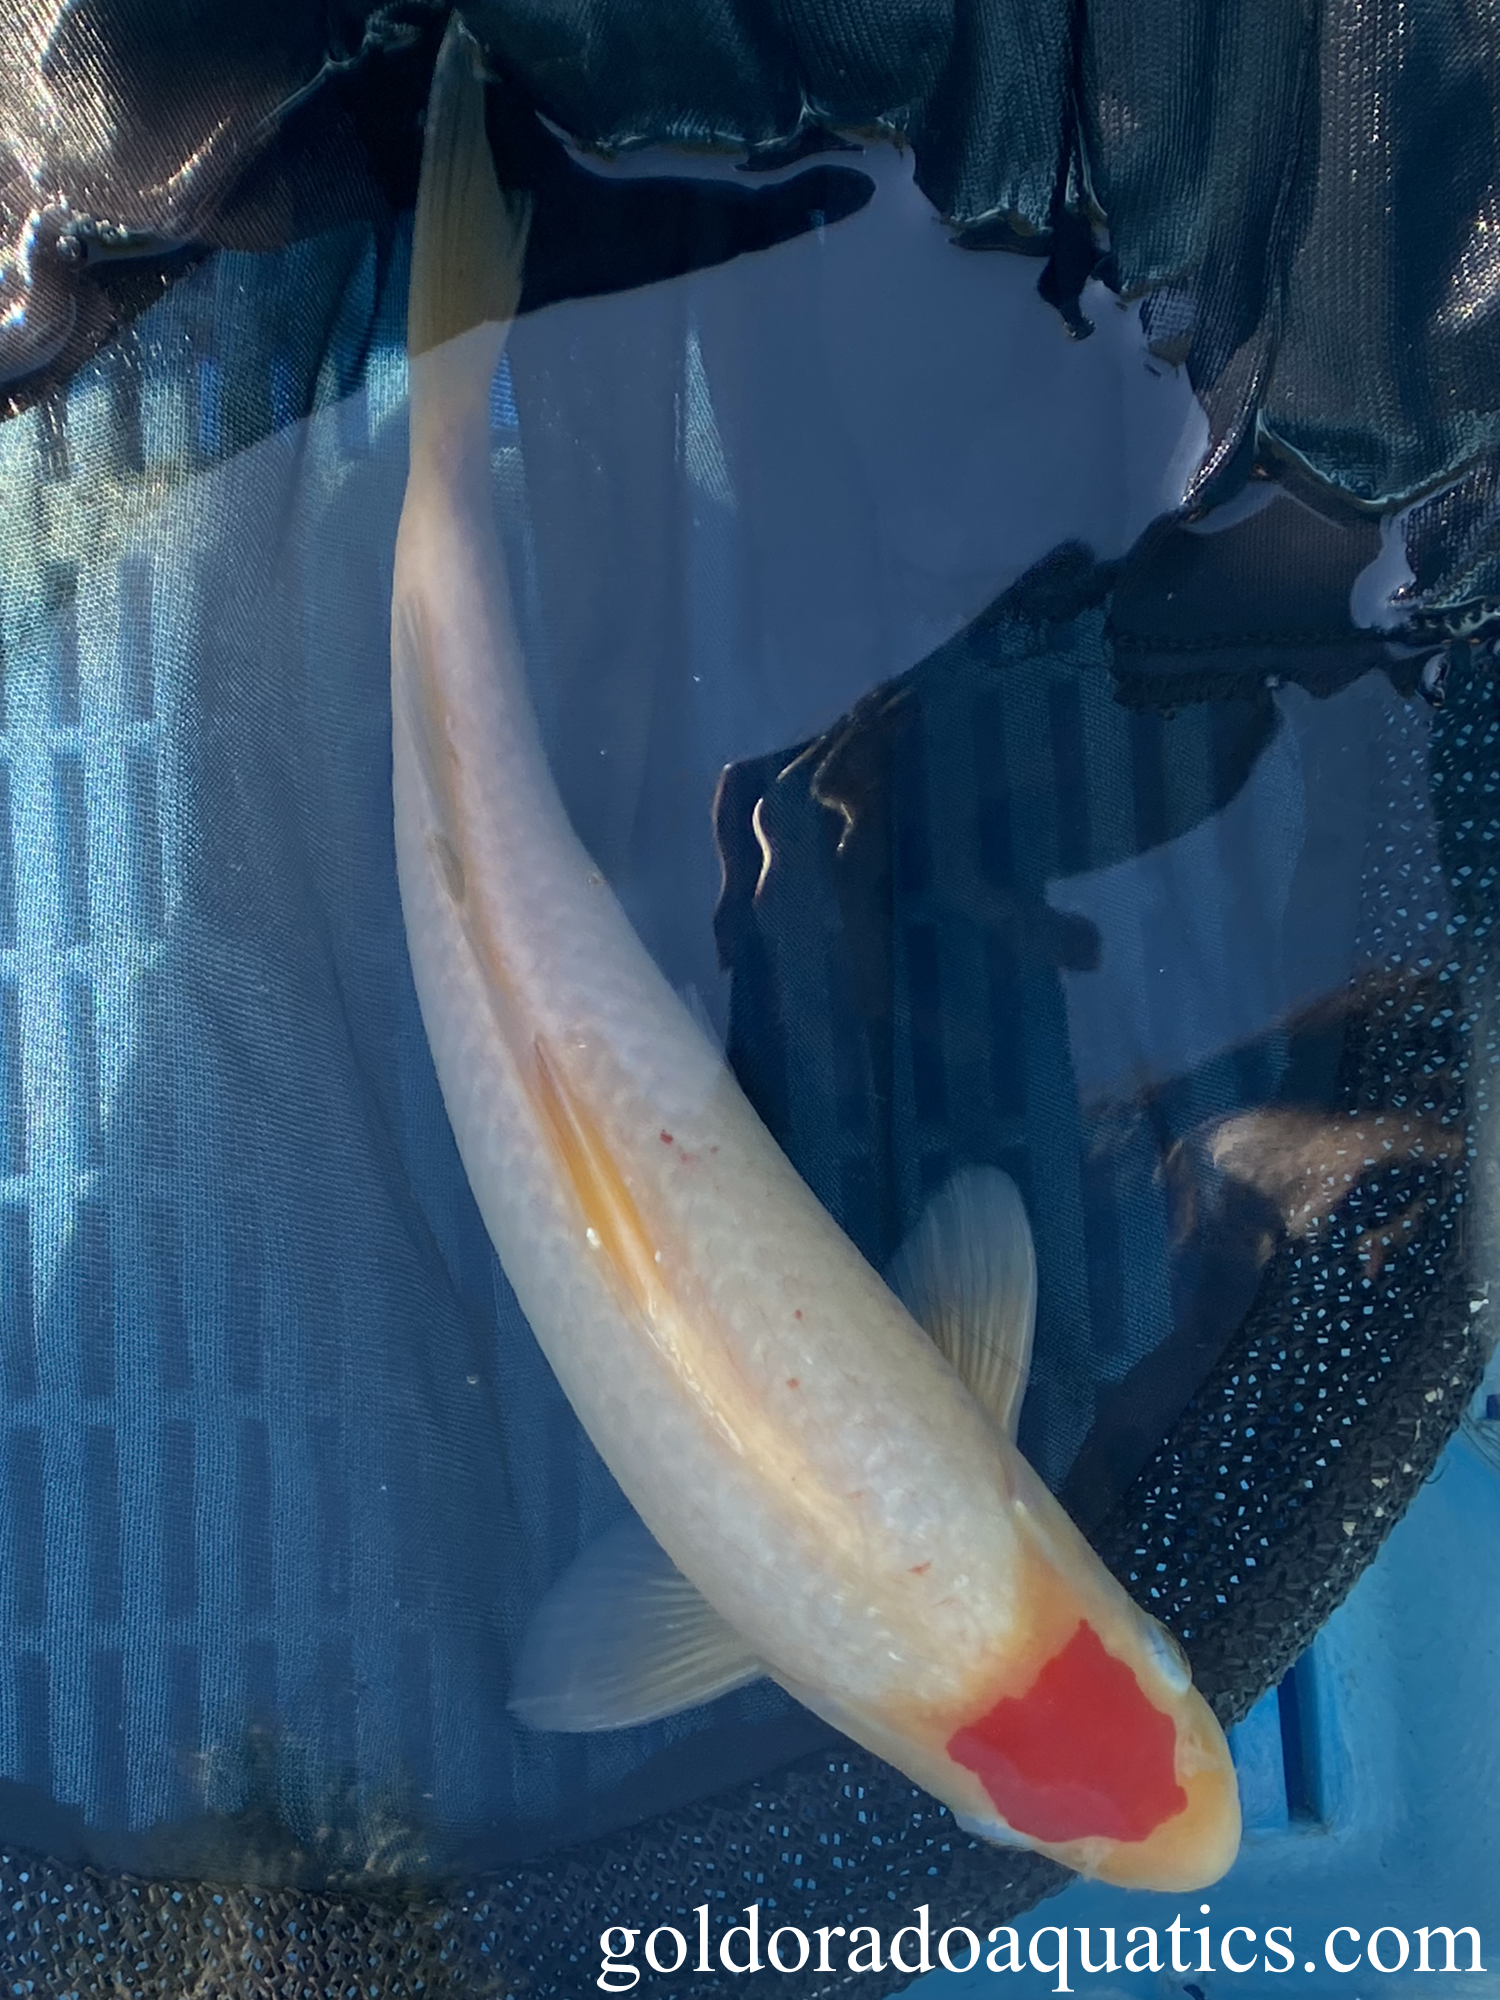 A white koi fish with a circular red pattern on the head.